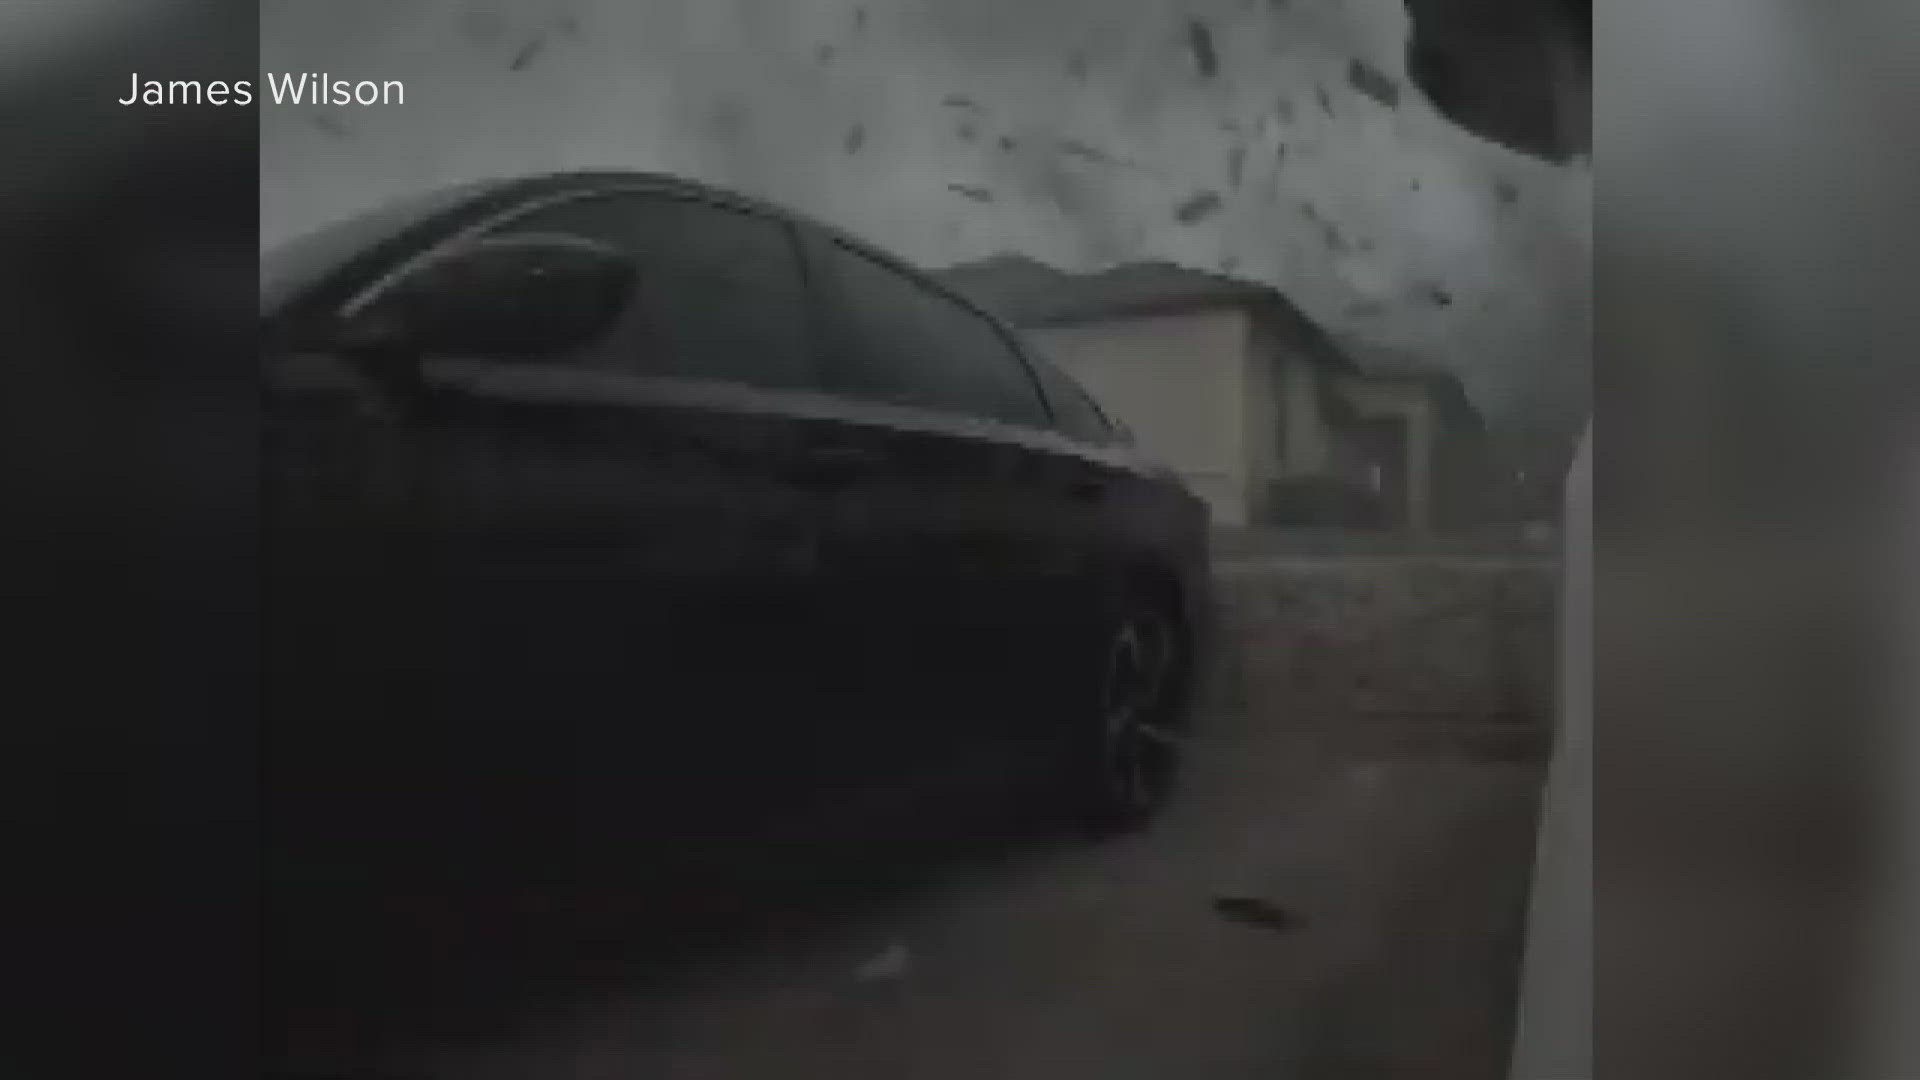 Video shows strong winds from the twister pick up debris from surrounding buildings, vehicles and plants before tossing them around.